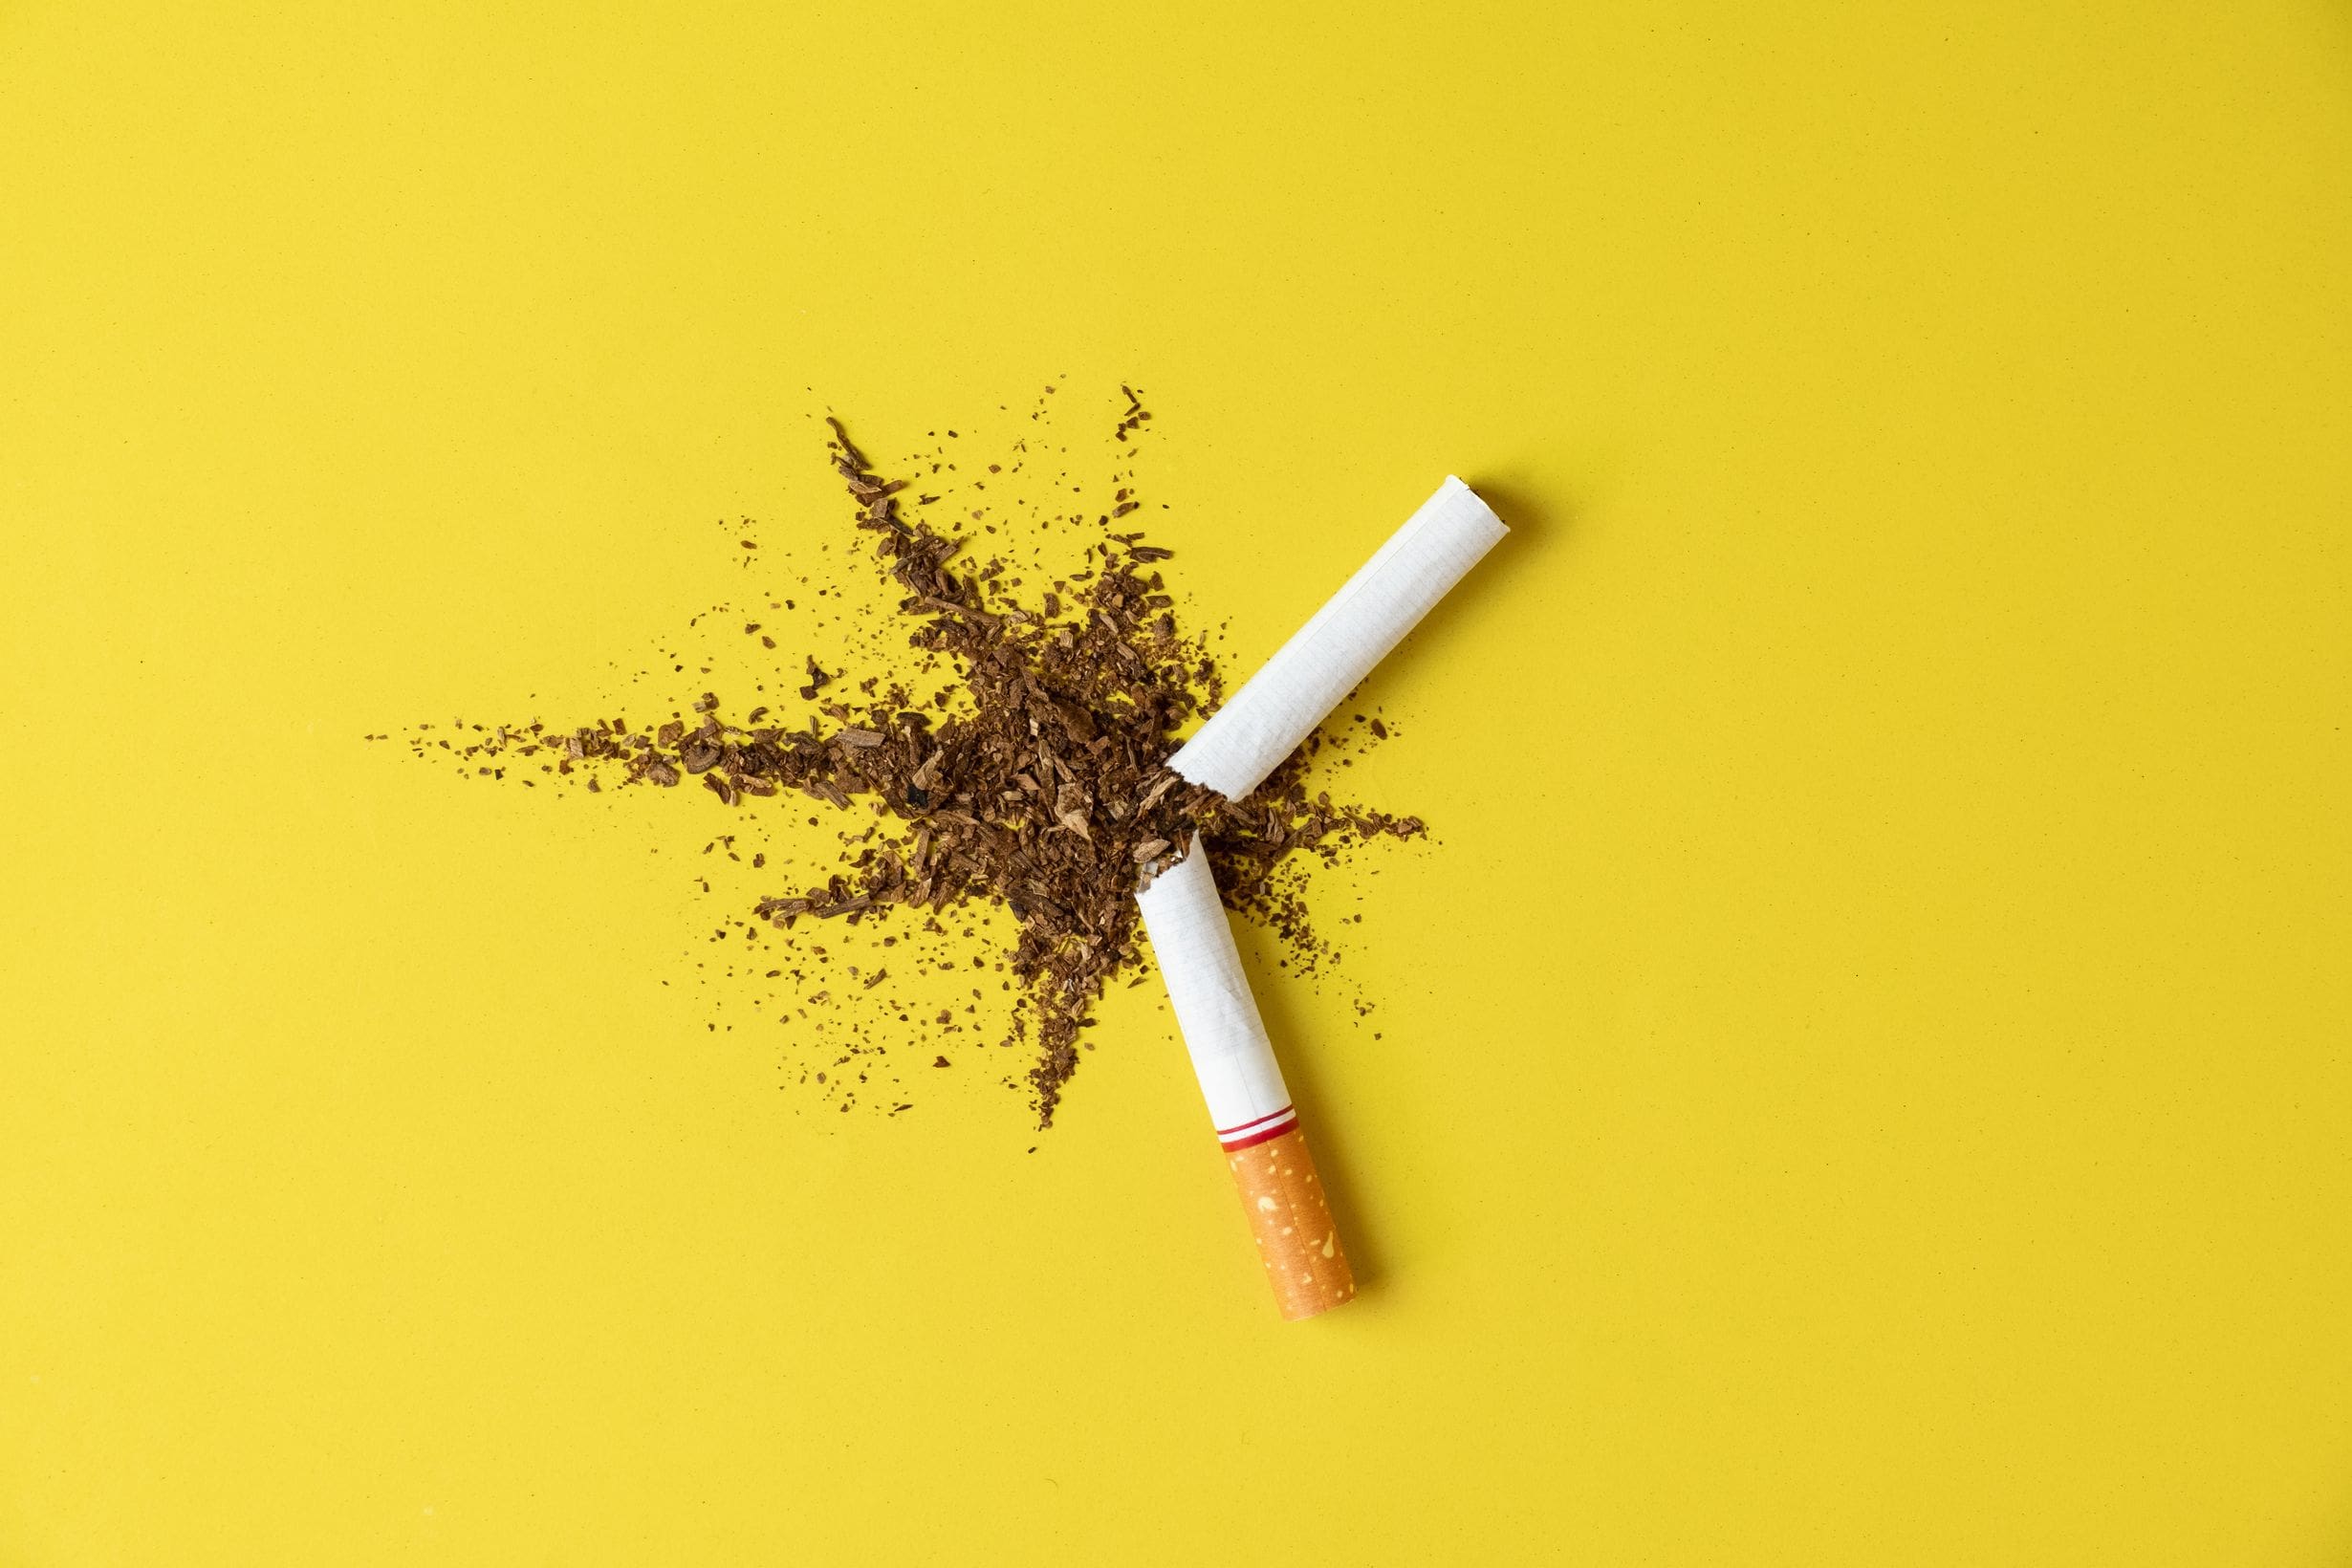 Why is quitting smoking so hard?